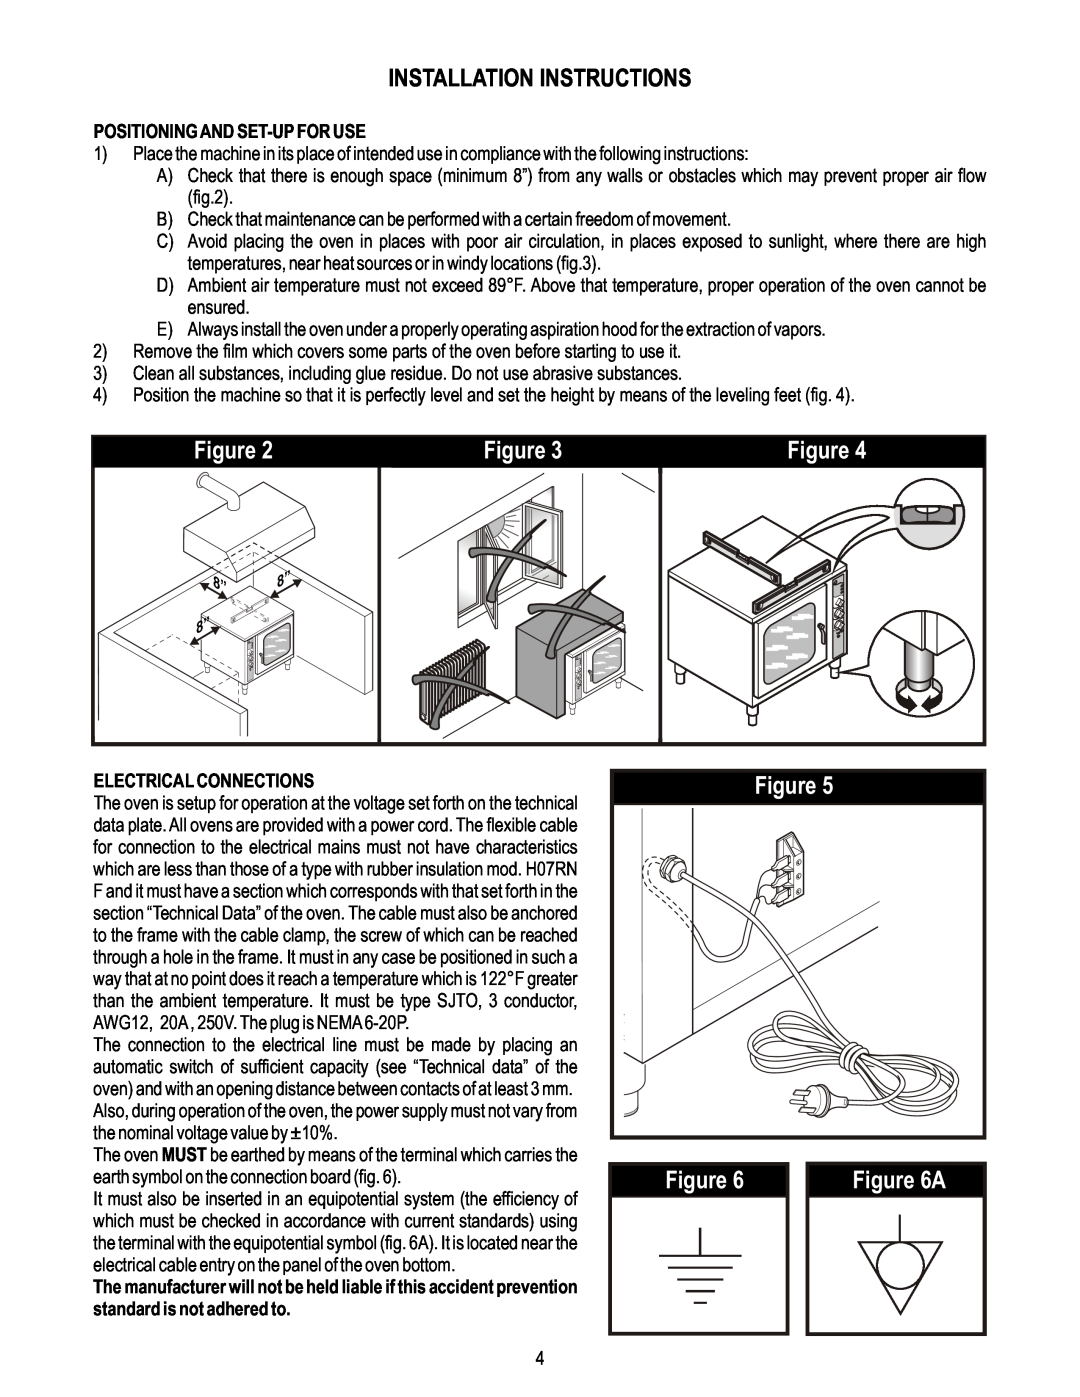 APW HSO-200 manual Installation Instructions, Positioning And Set-Up For Use, Electrical Connections, 8” ” 